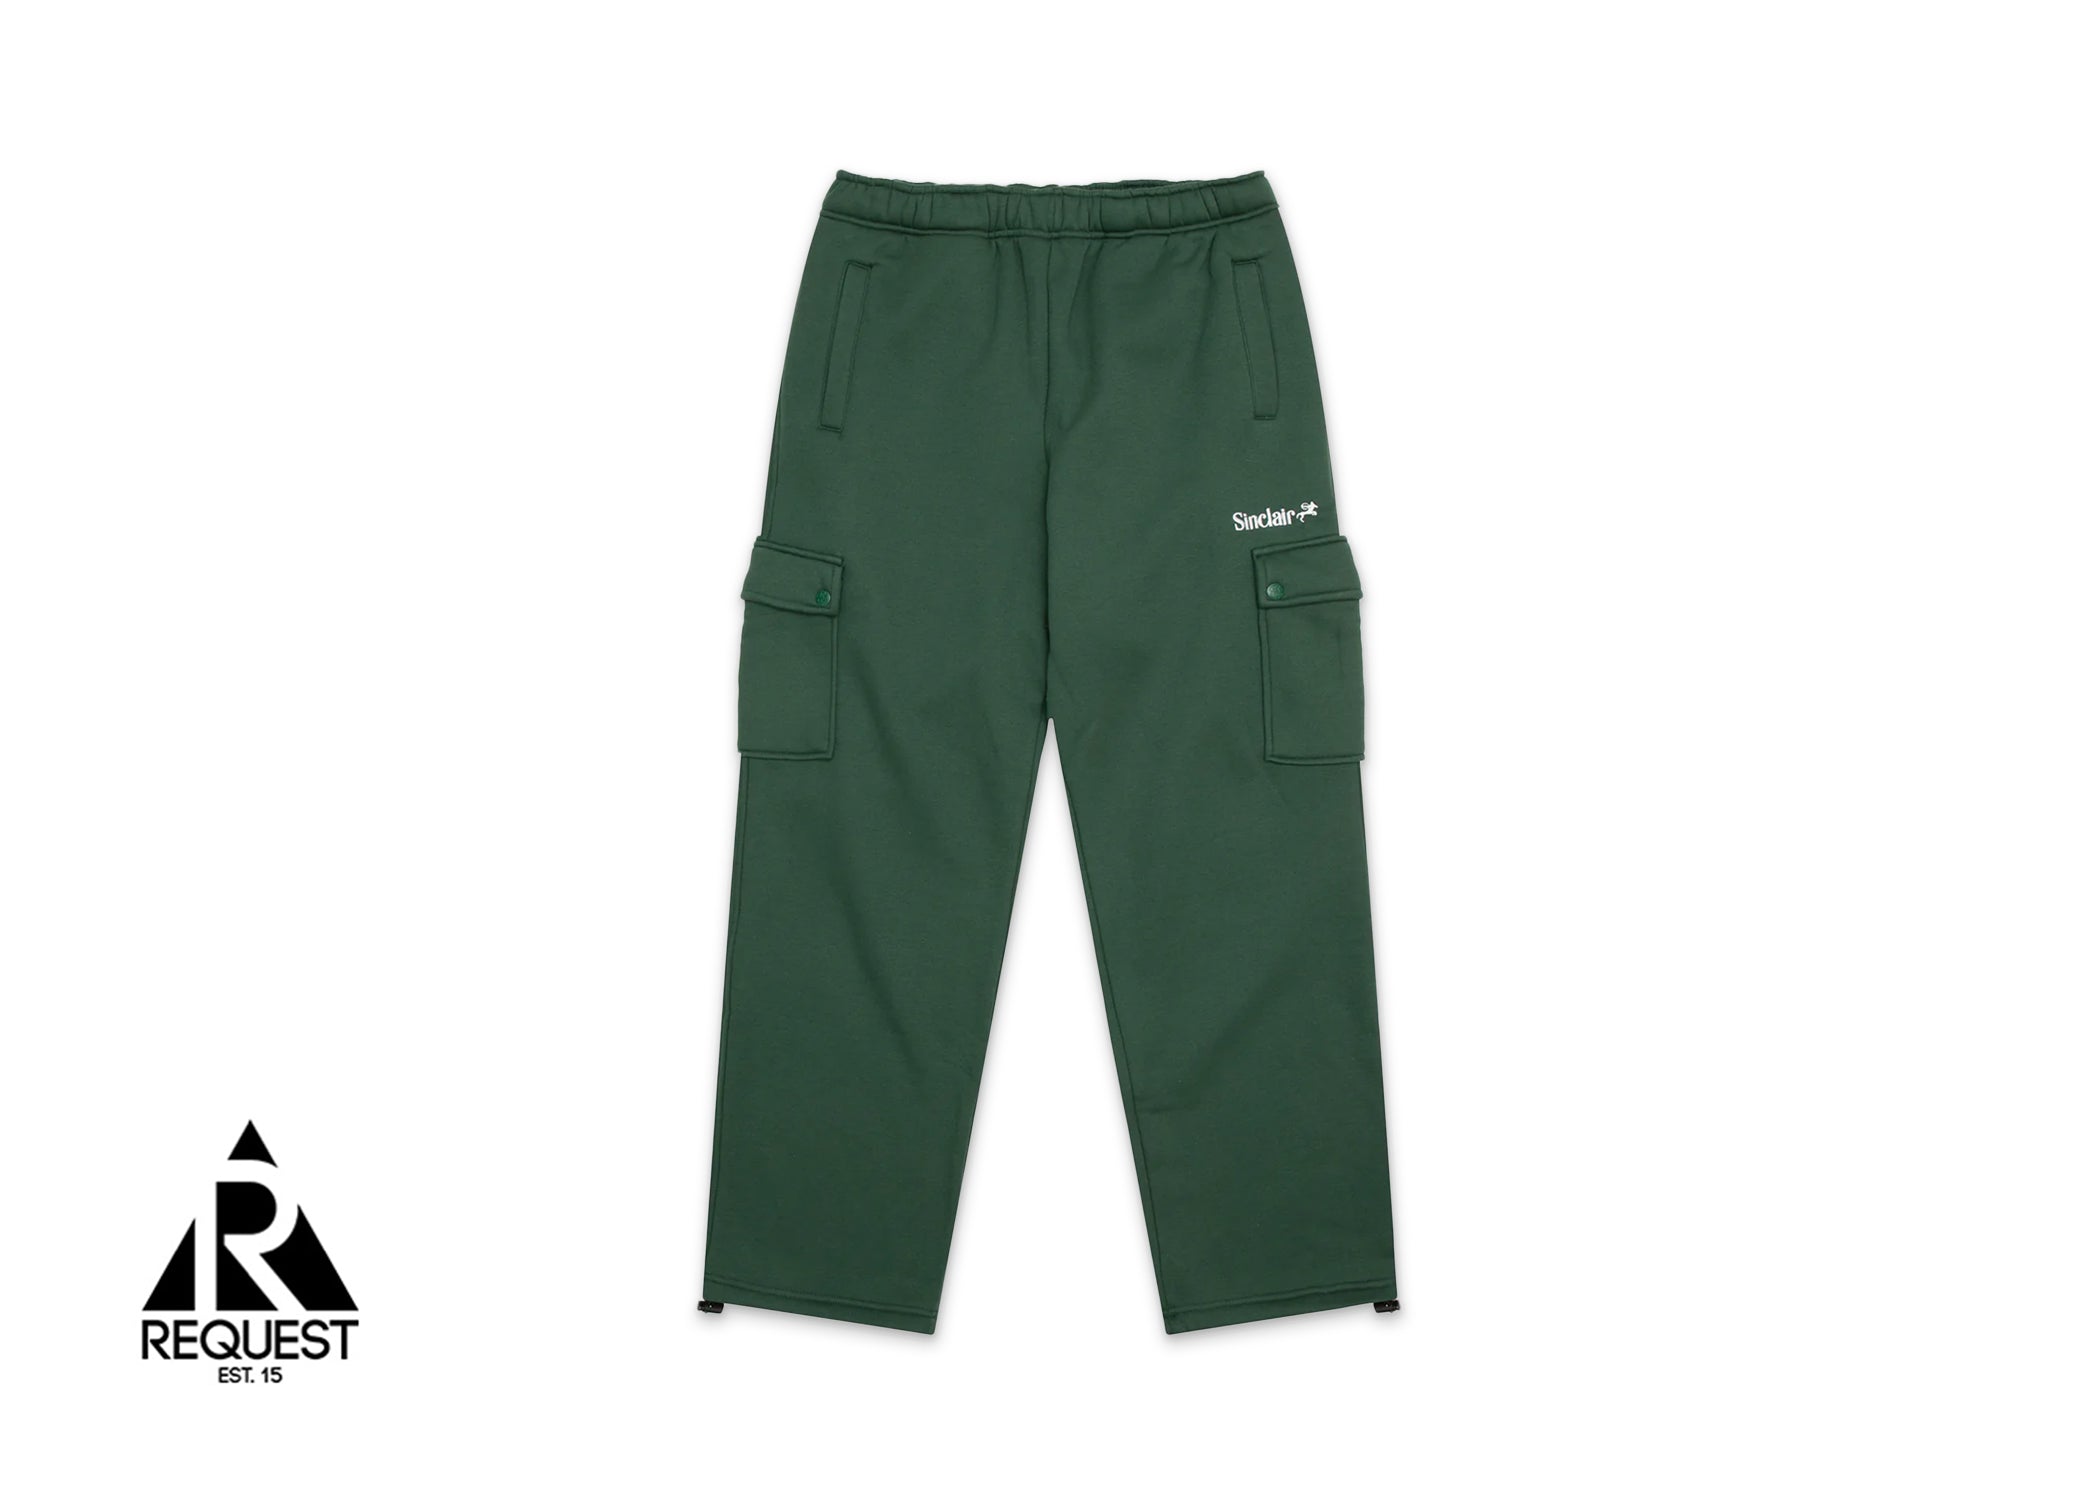 Sinclair Texture Cargo Sweatpants "Forest Green"